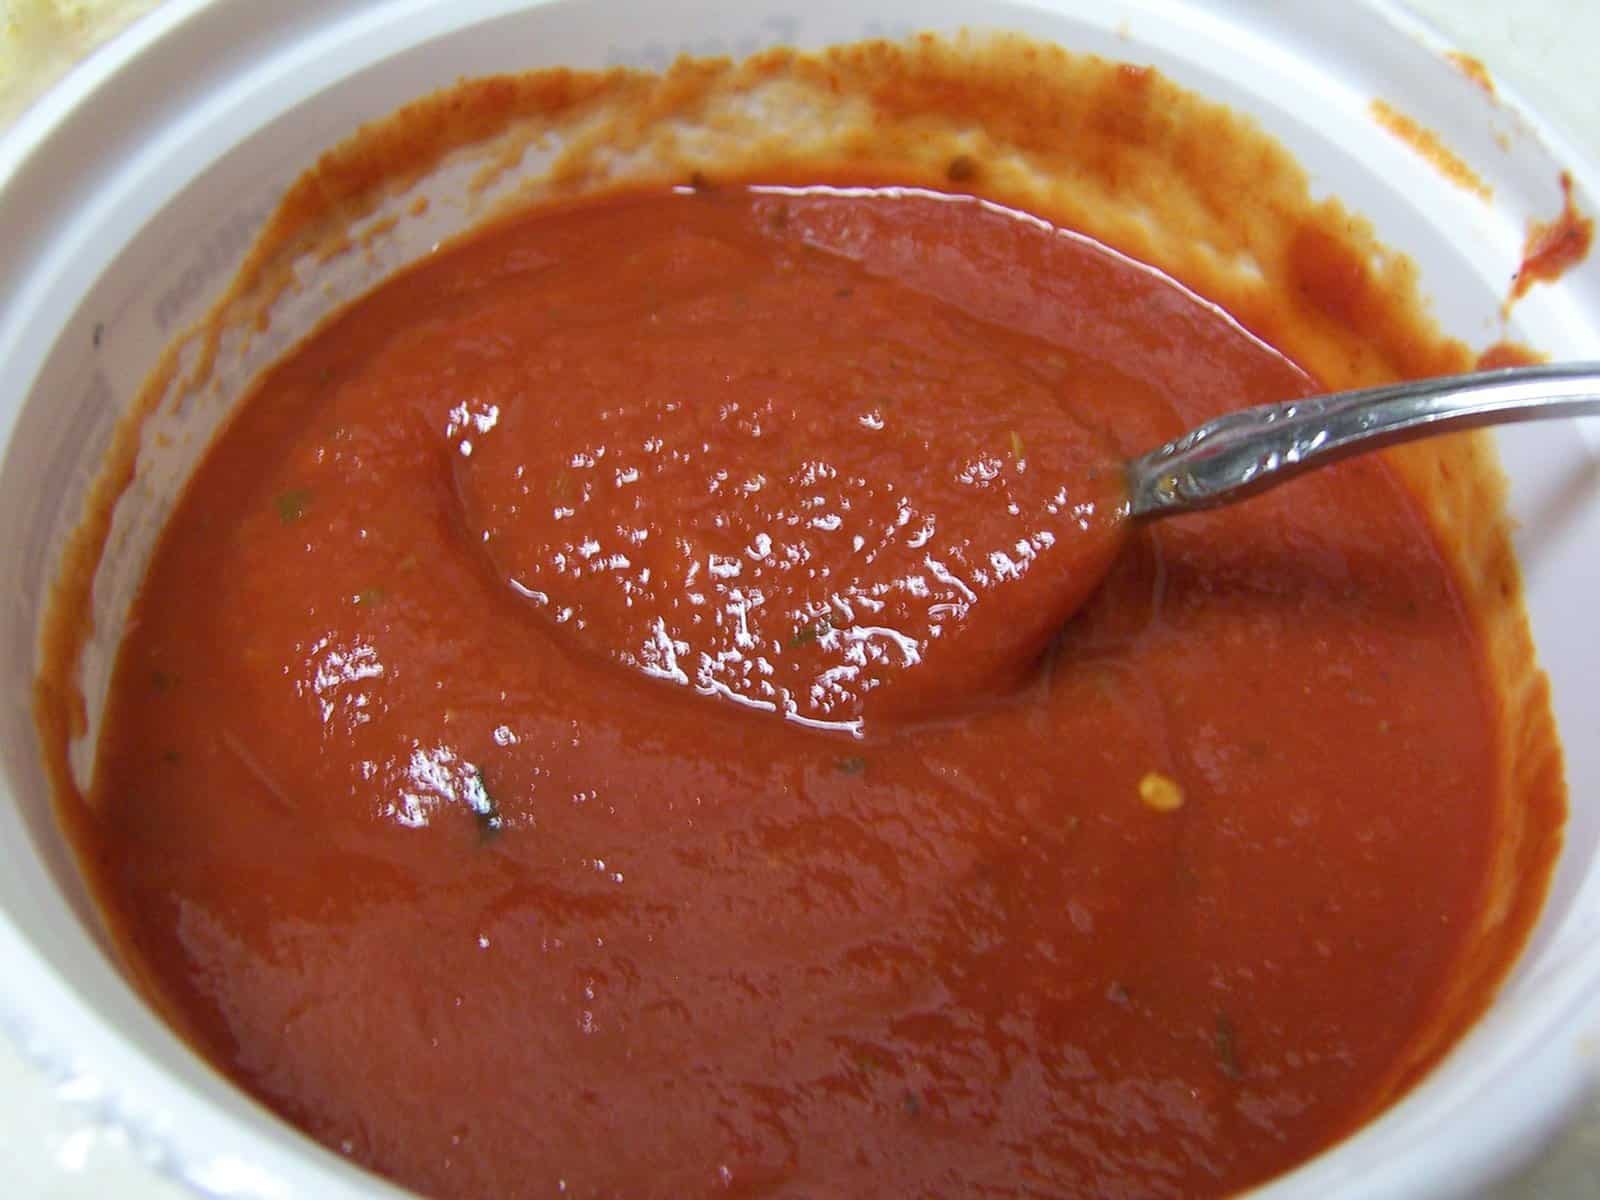  This sauce is also great for pasta dishes, making it a versatile addition to any recipe box.